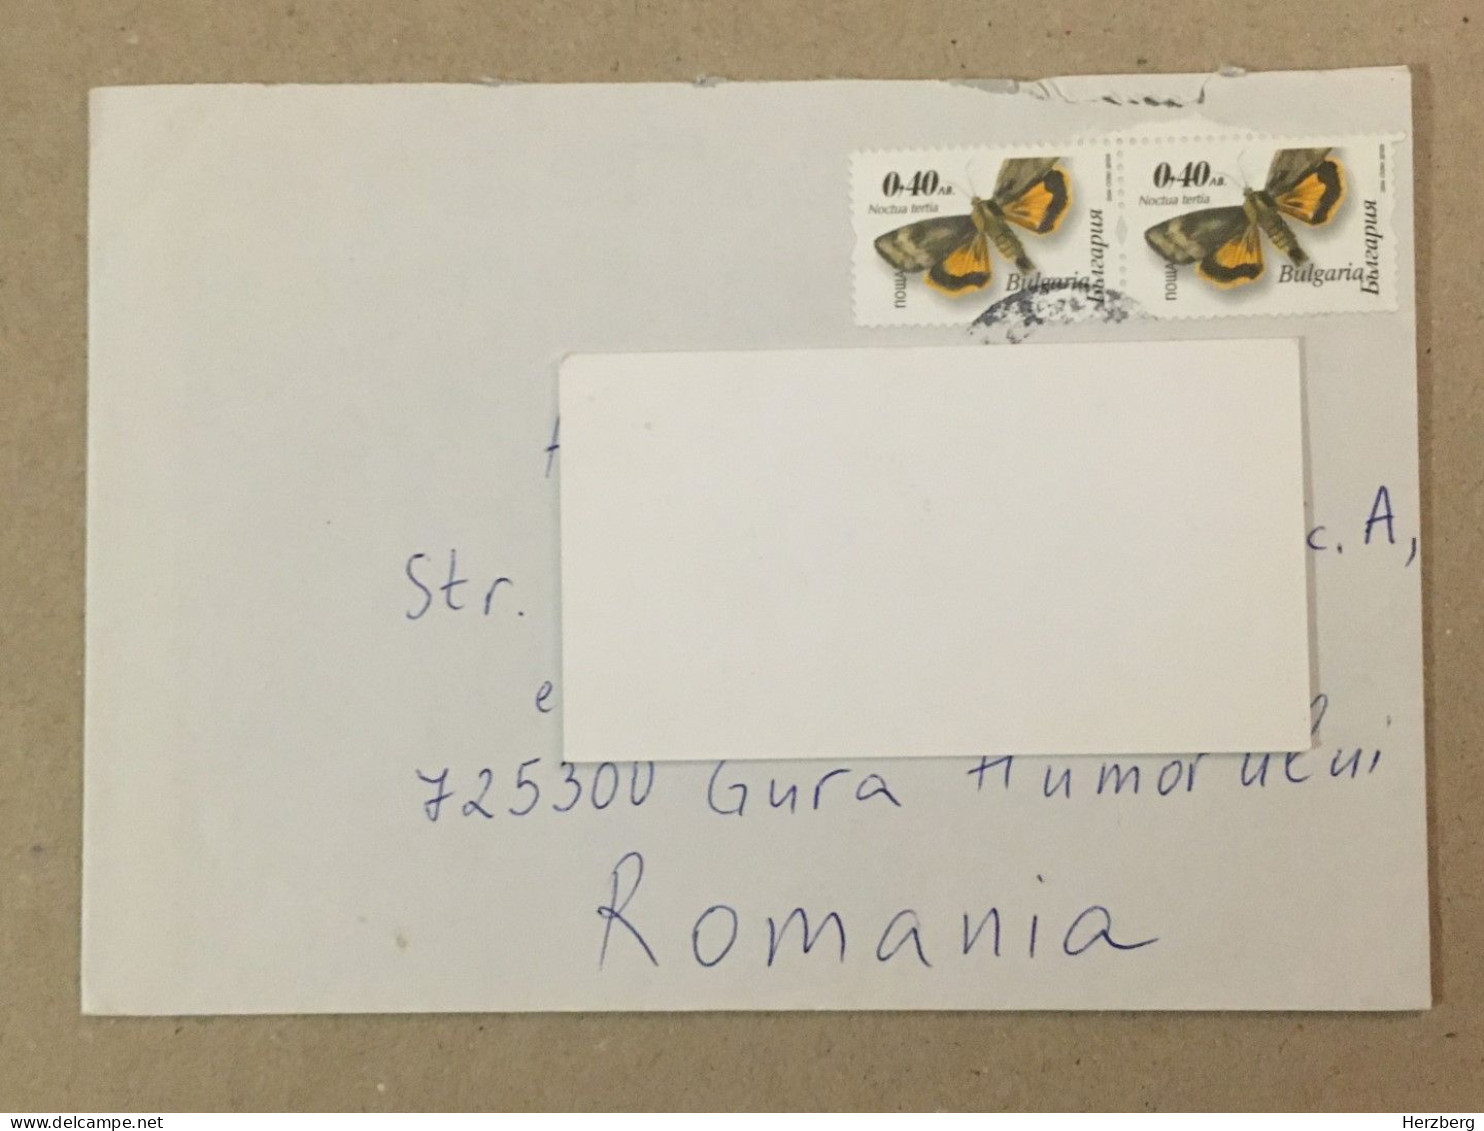 Bulgaria Used Letter Stamp Cover Registered Barcode Label Printed Sticker 2013 Butterfly Papillon - Covers & Documents